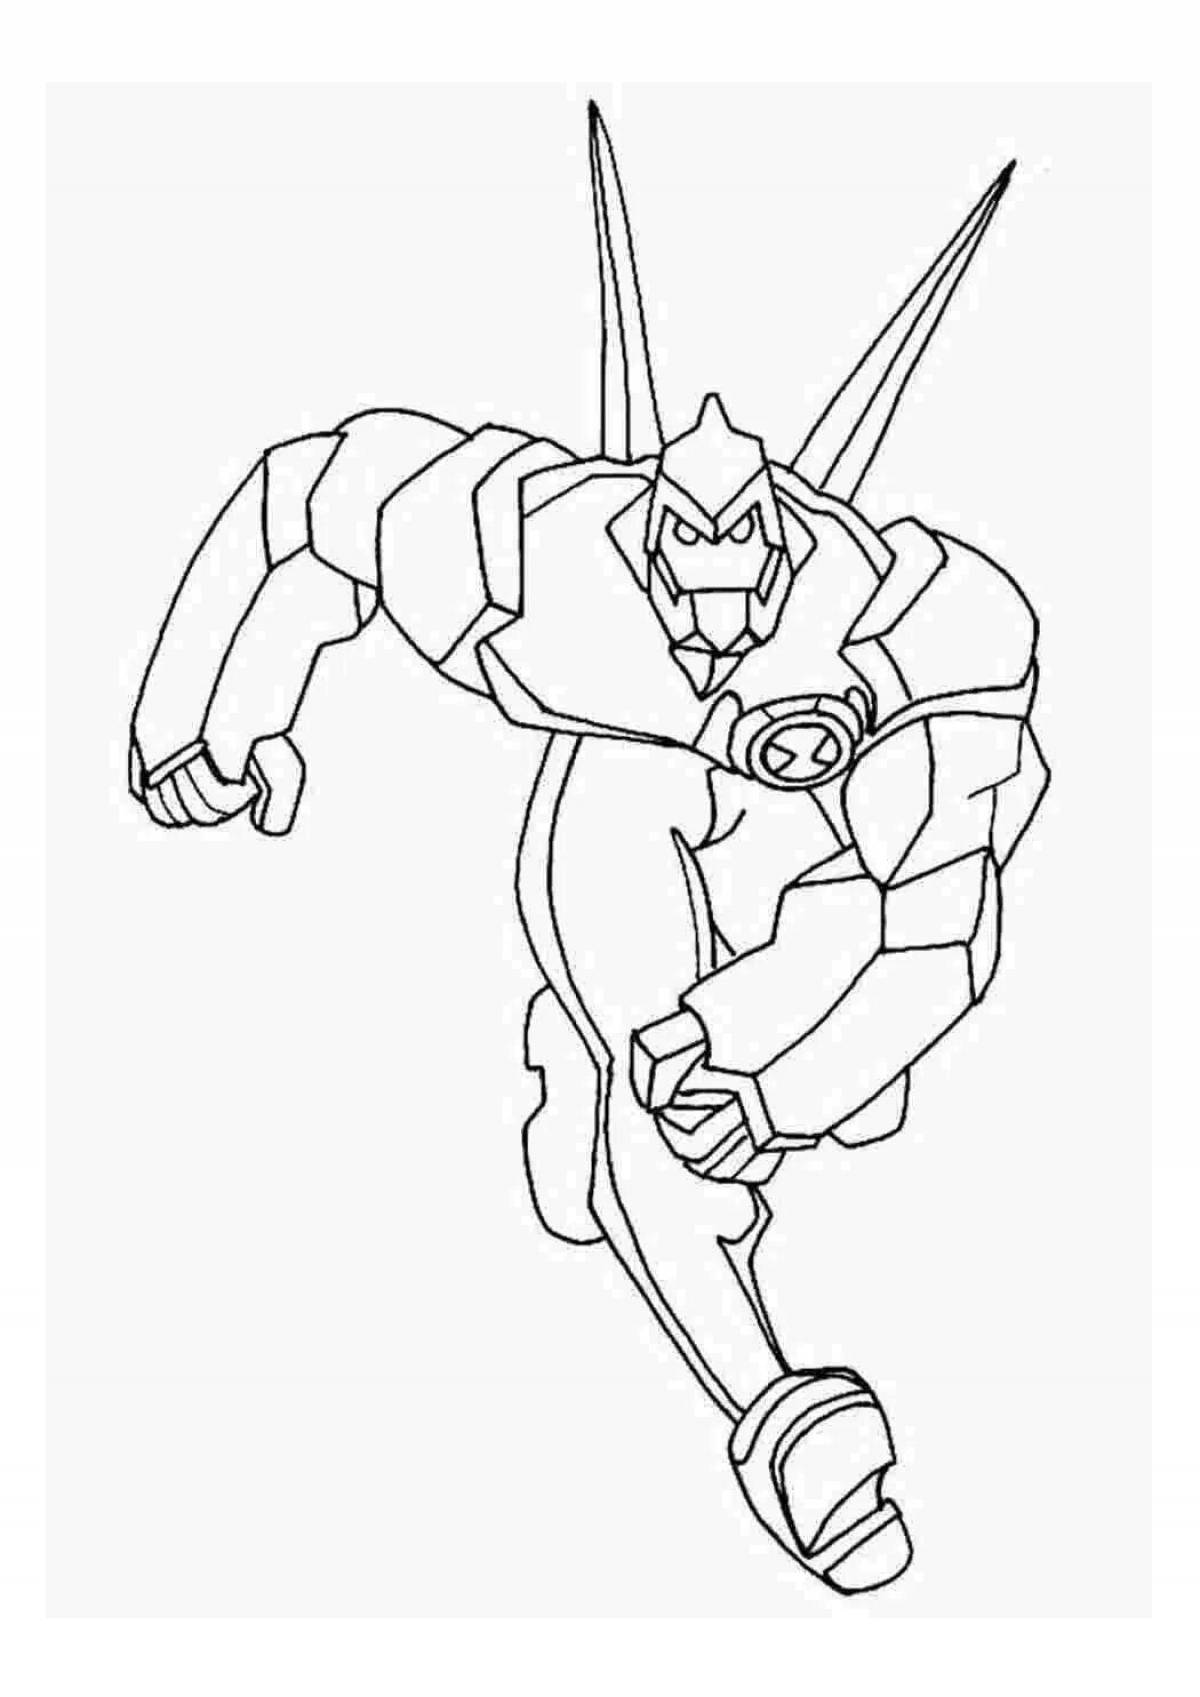 Charming ben 10 omniverse coloring page